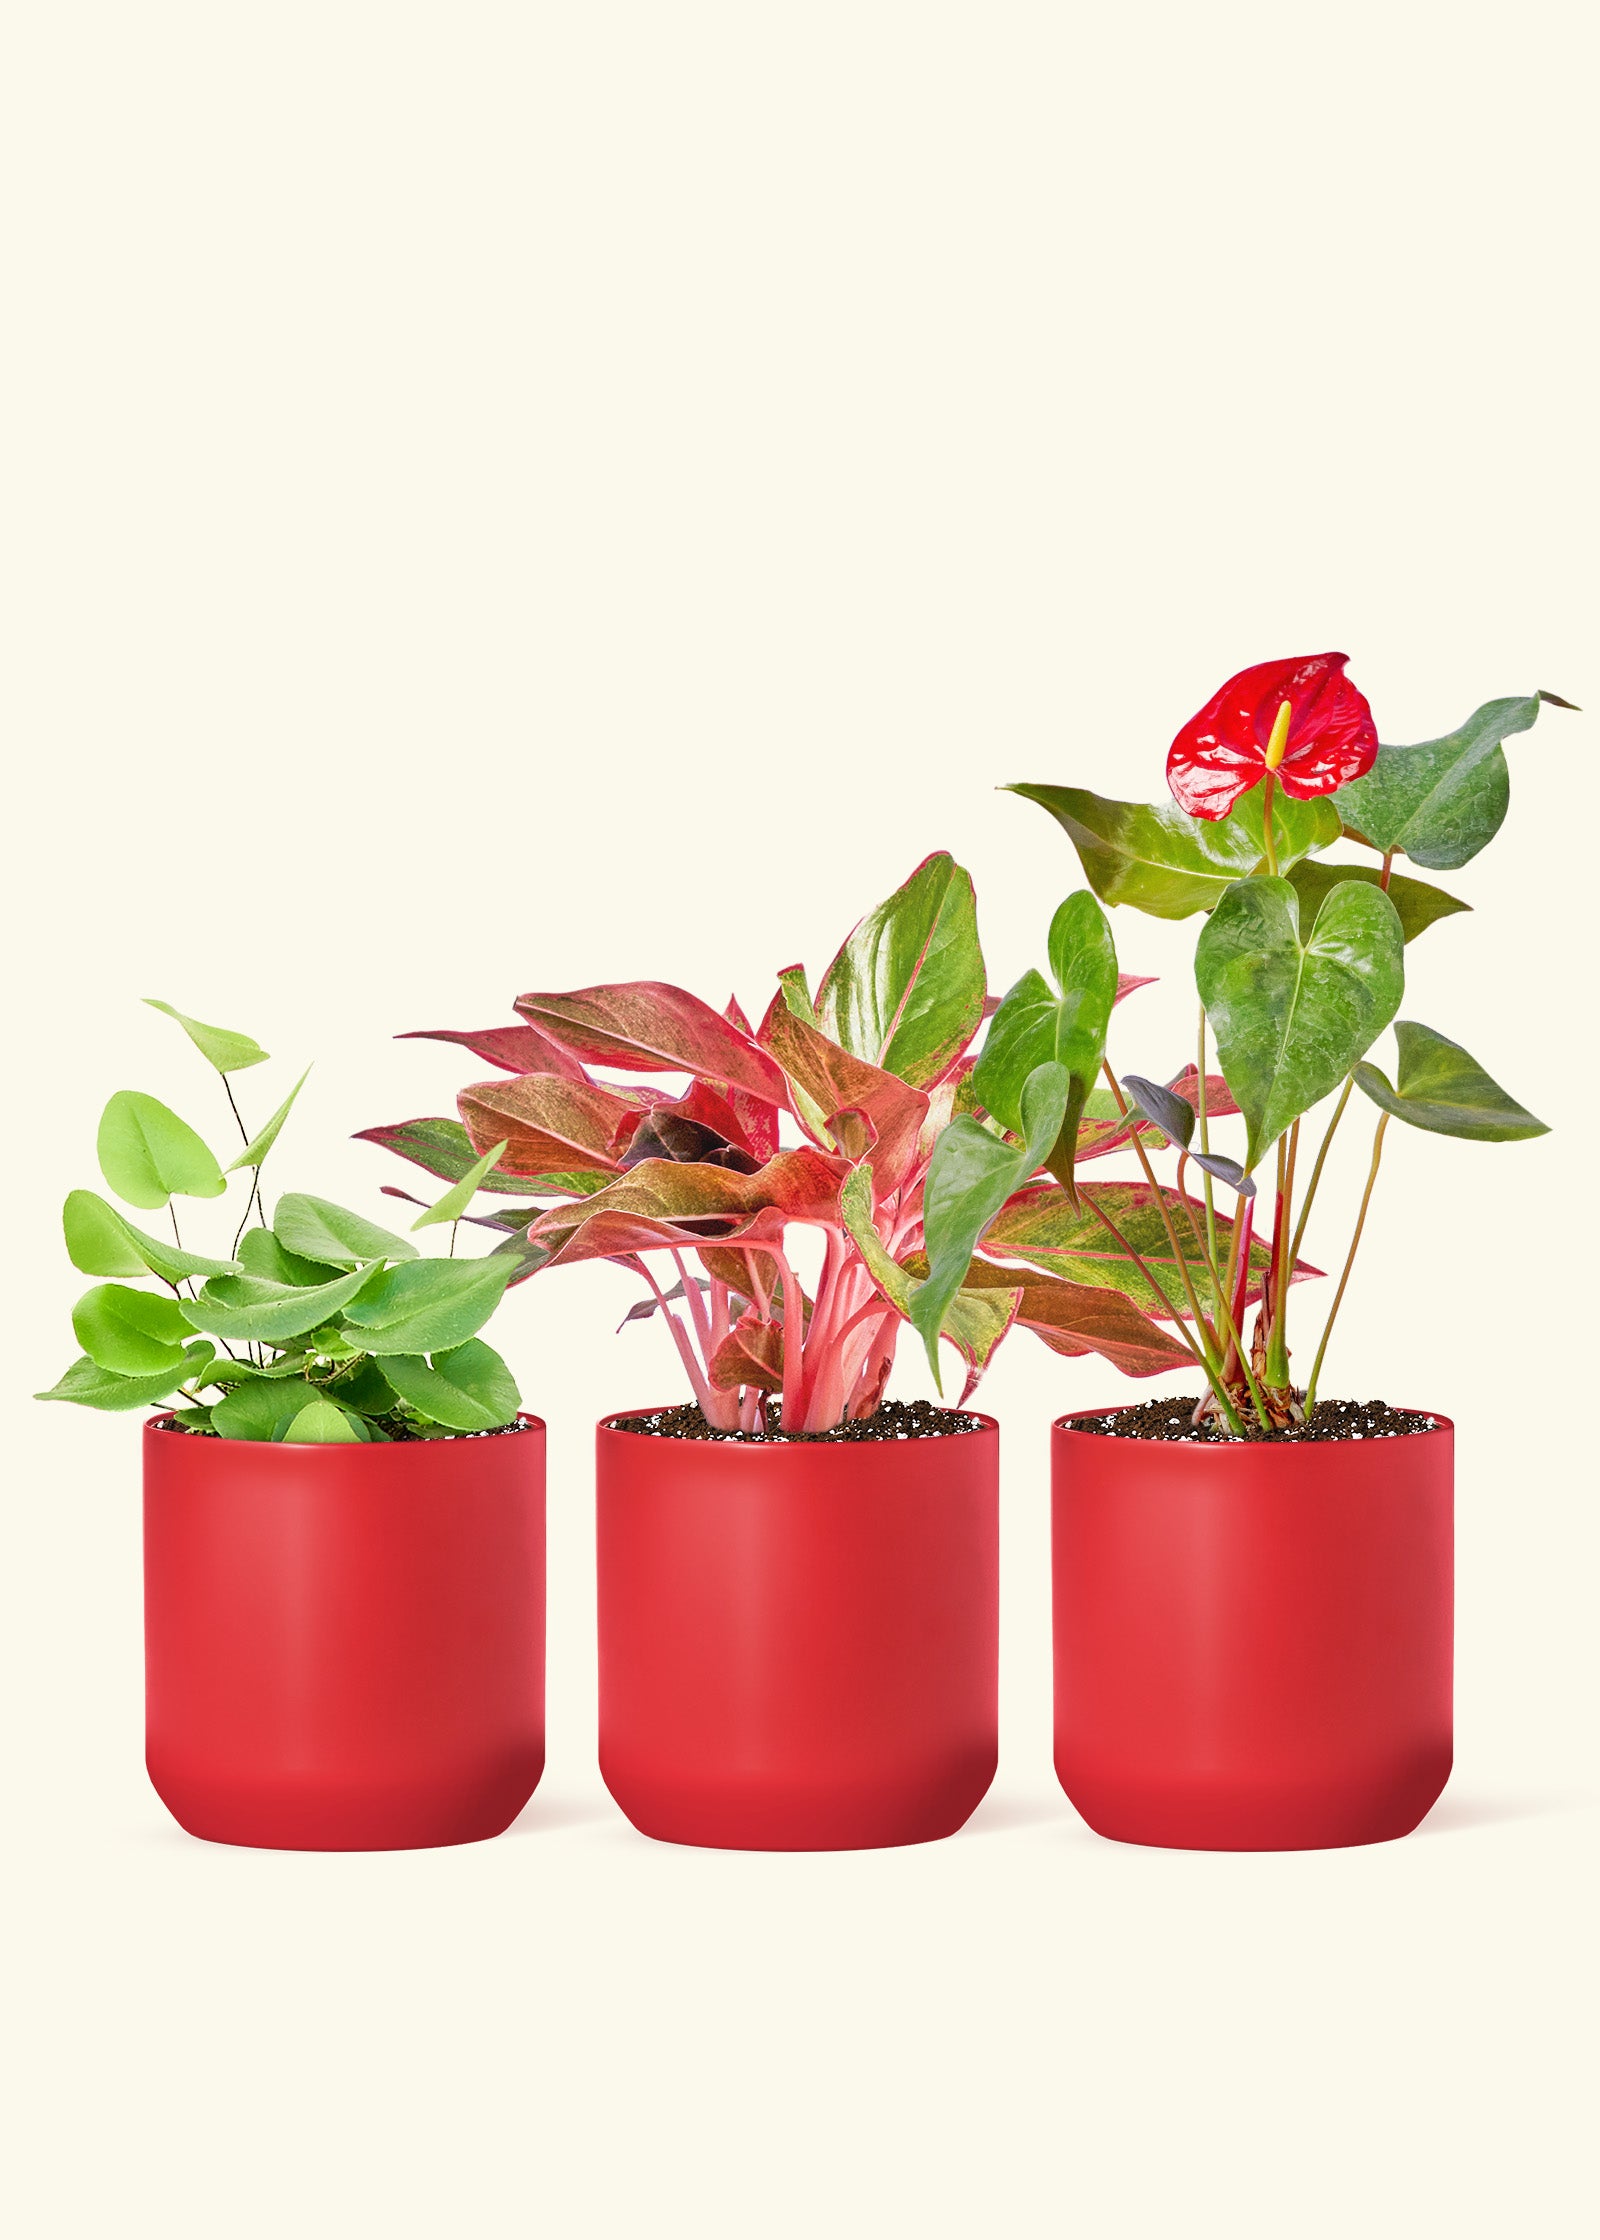 A V-Day Potted Trio - Heartleaf Fern, Aglaonema Creta and Red Anthurium in a Red Ceramic Planter Comes with three bags of Organic Potting Mix